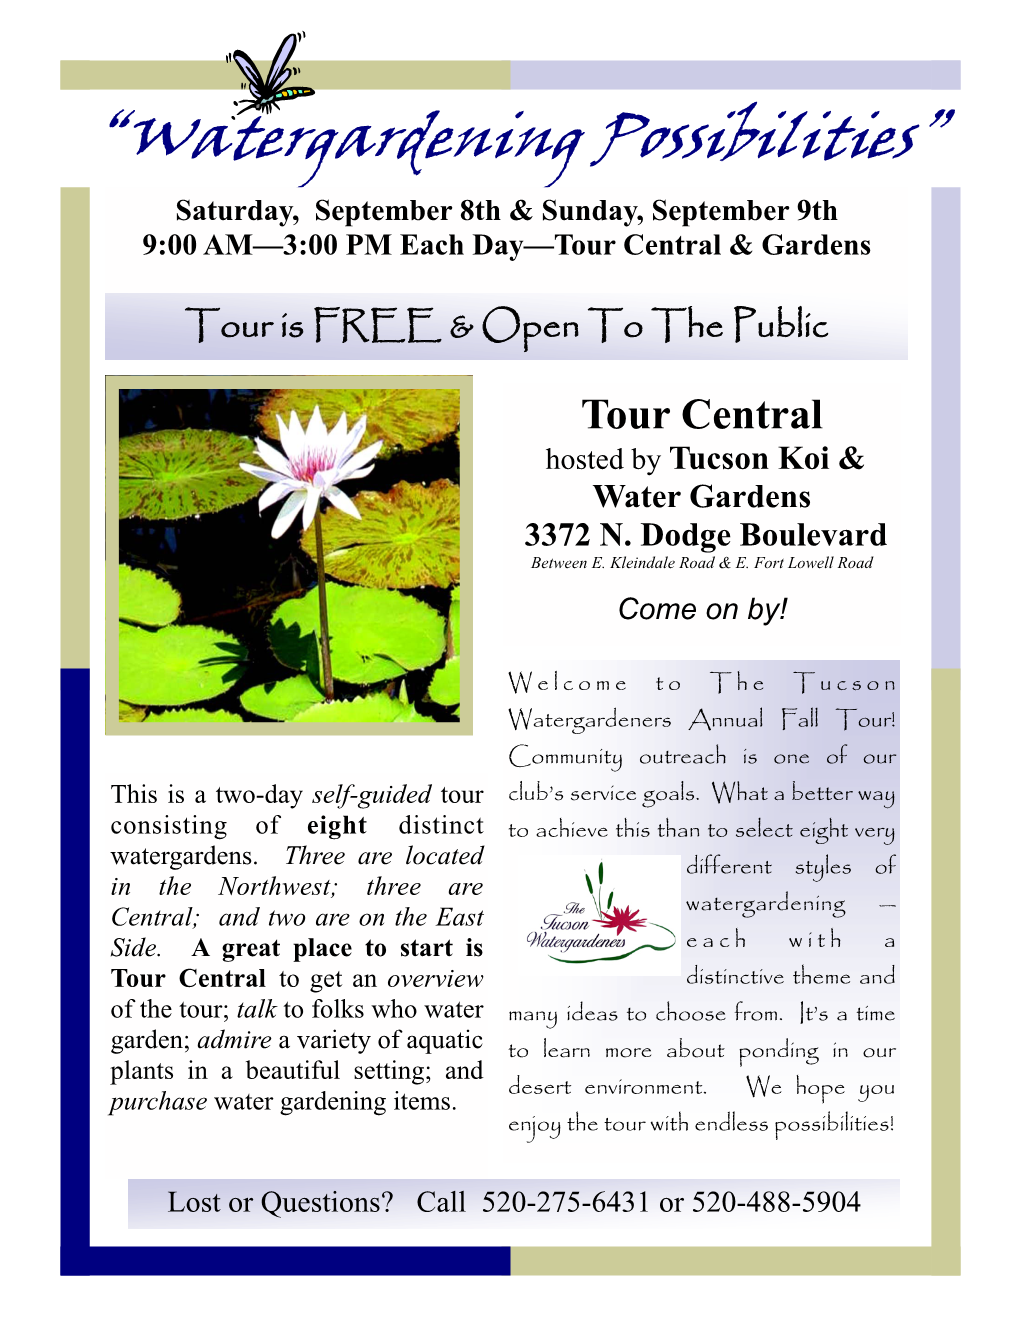 “Watergardening Possibilities” Saturday, September 8Th & Sunday, September 9Th 9:00 AM—3:00 PM Each Day—Tour Central & Gardens